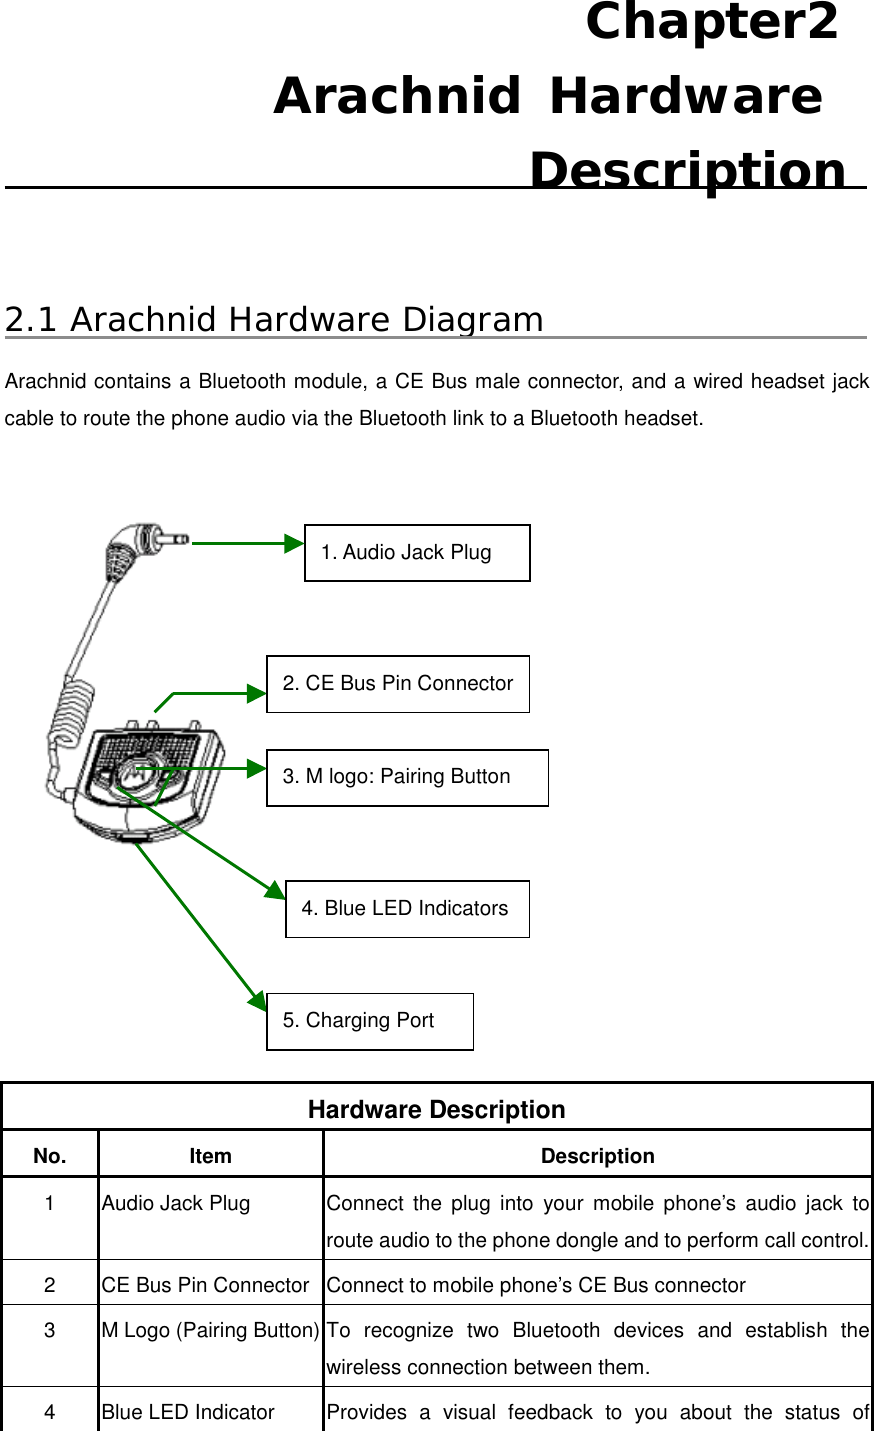 Chapter2  Arachnid Hardware Description  2.1 Arachnid Hardware Diagram Arachnid contains a Bluetooth module, a CE Bus male connector, and a wired headset jack cable to route the phone audio via the Bluetooth link to a Bluetooth headset.          Hardware Description No. Item  Description 1  Audio Jack Plug  Connect the plug into your mobile phone’s audio jack to route audio to the phone dongle and to perform call control.2  CE Bus Pin Connector  Connect to mobile phone’s CE Bus connector 3  M Logo (Pairing Button) To recognize two Bluetooth devices and establish the wireless connection between them.     4  Blue LED Indicator  Provides a visual feedback to you about the status of 1. Audio Jack Plug 2. CE Bus Pin Connector3. M logo: Pairing Button 4. Blue LED Indicators5. Charging Port 